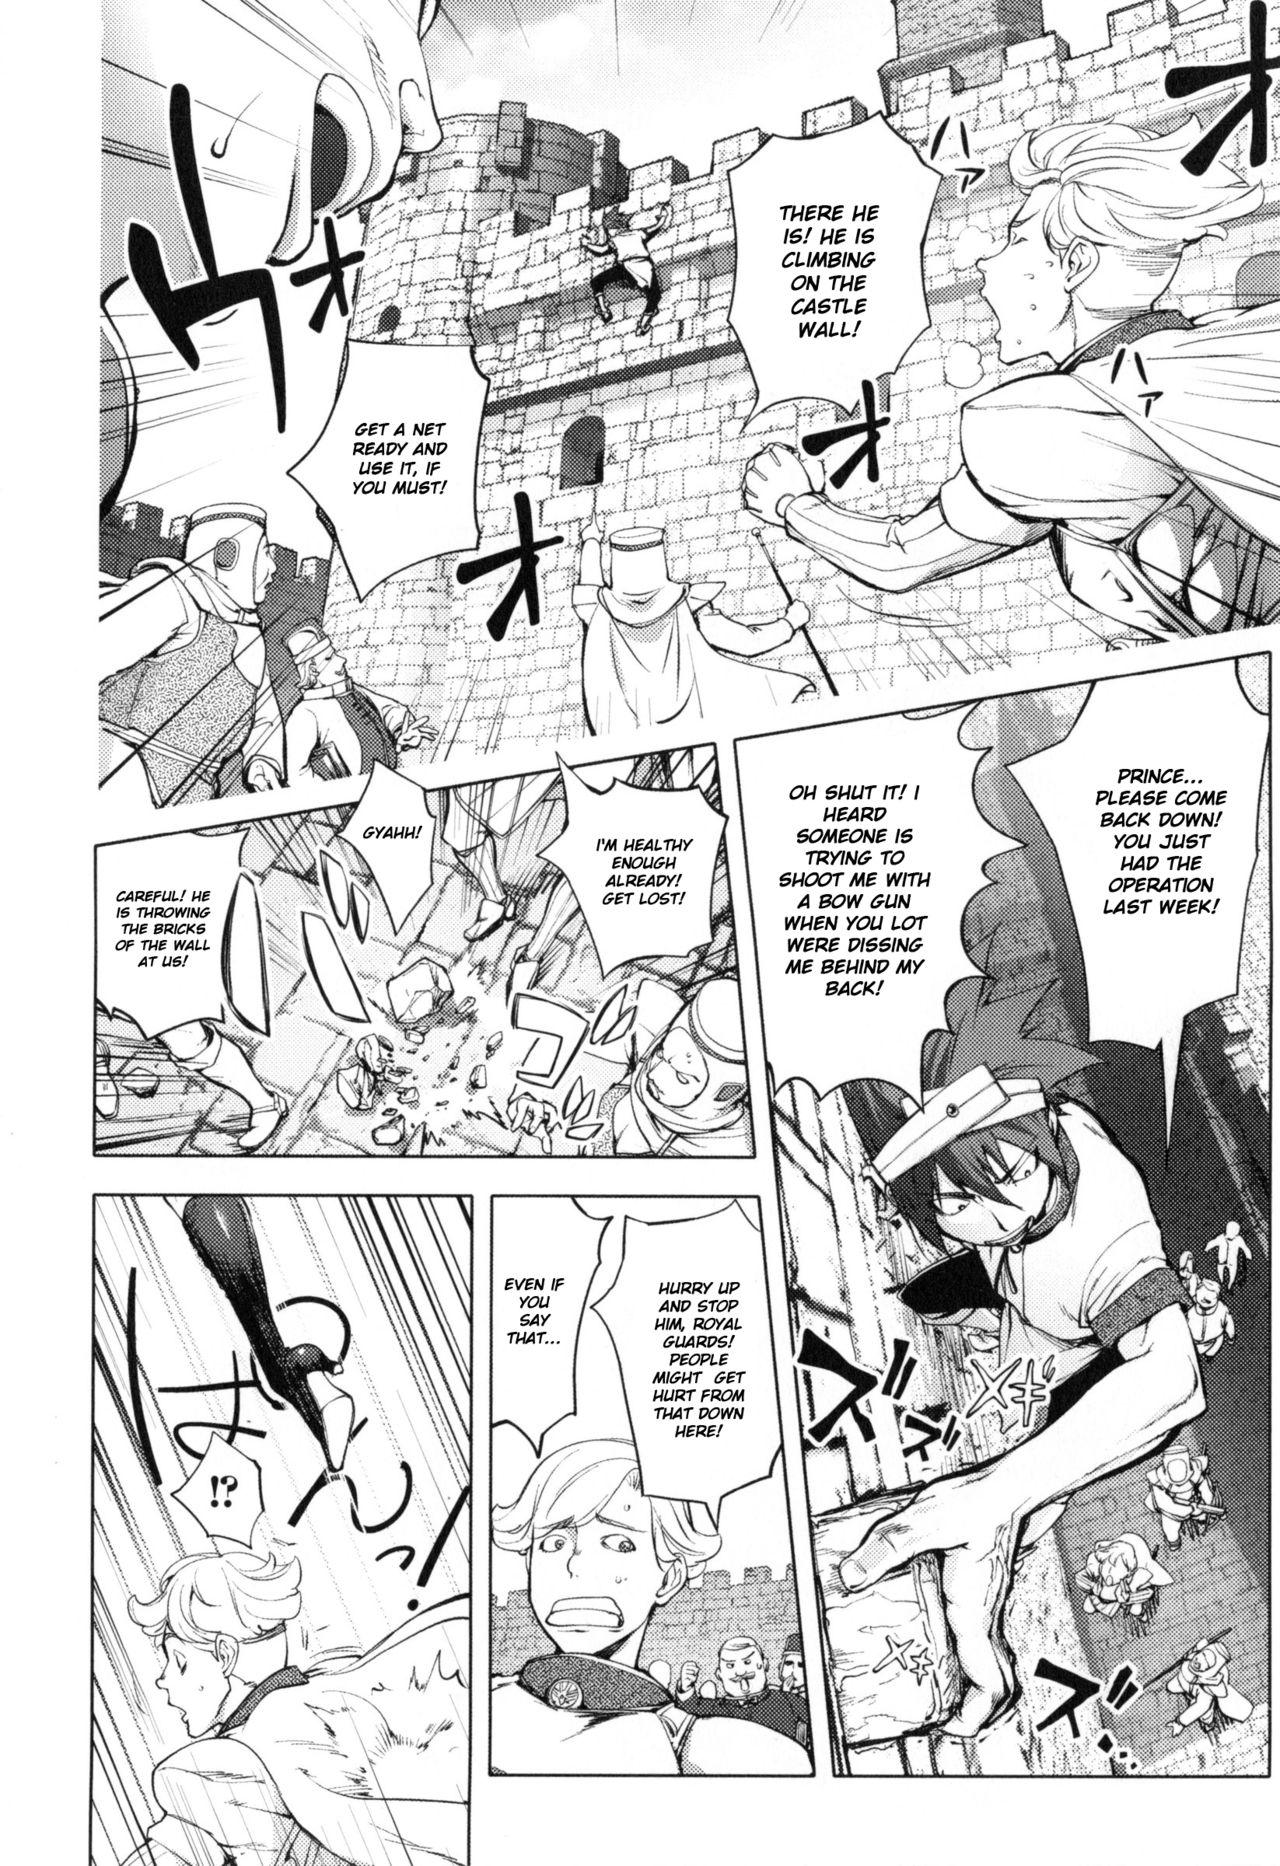 Snake Girls 2 | The Adventures Of The Three Heroes: Chapter 6 - Snake Girl Part 2 1